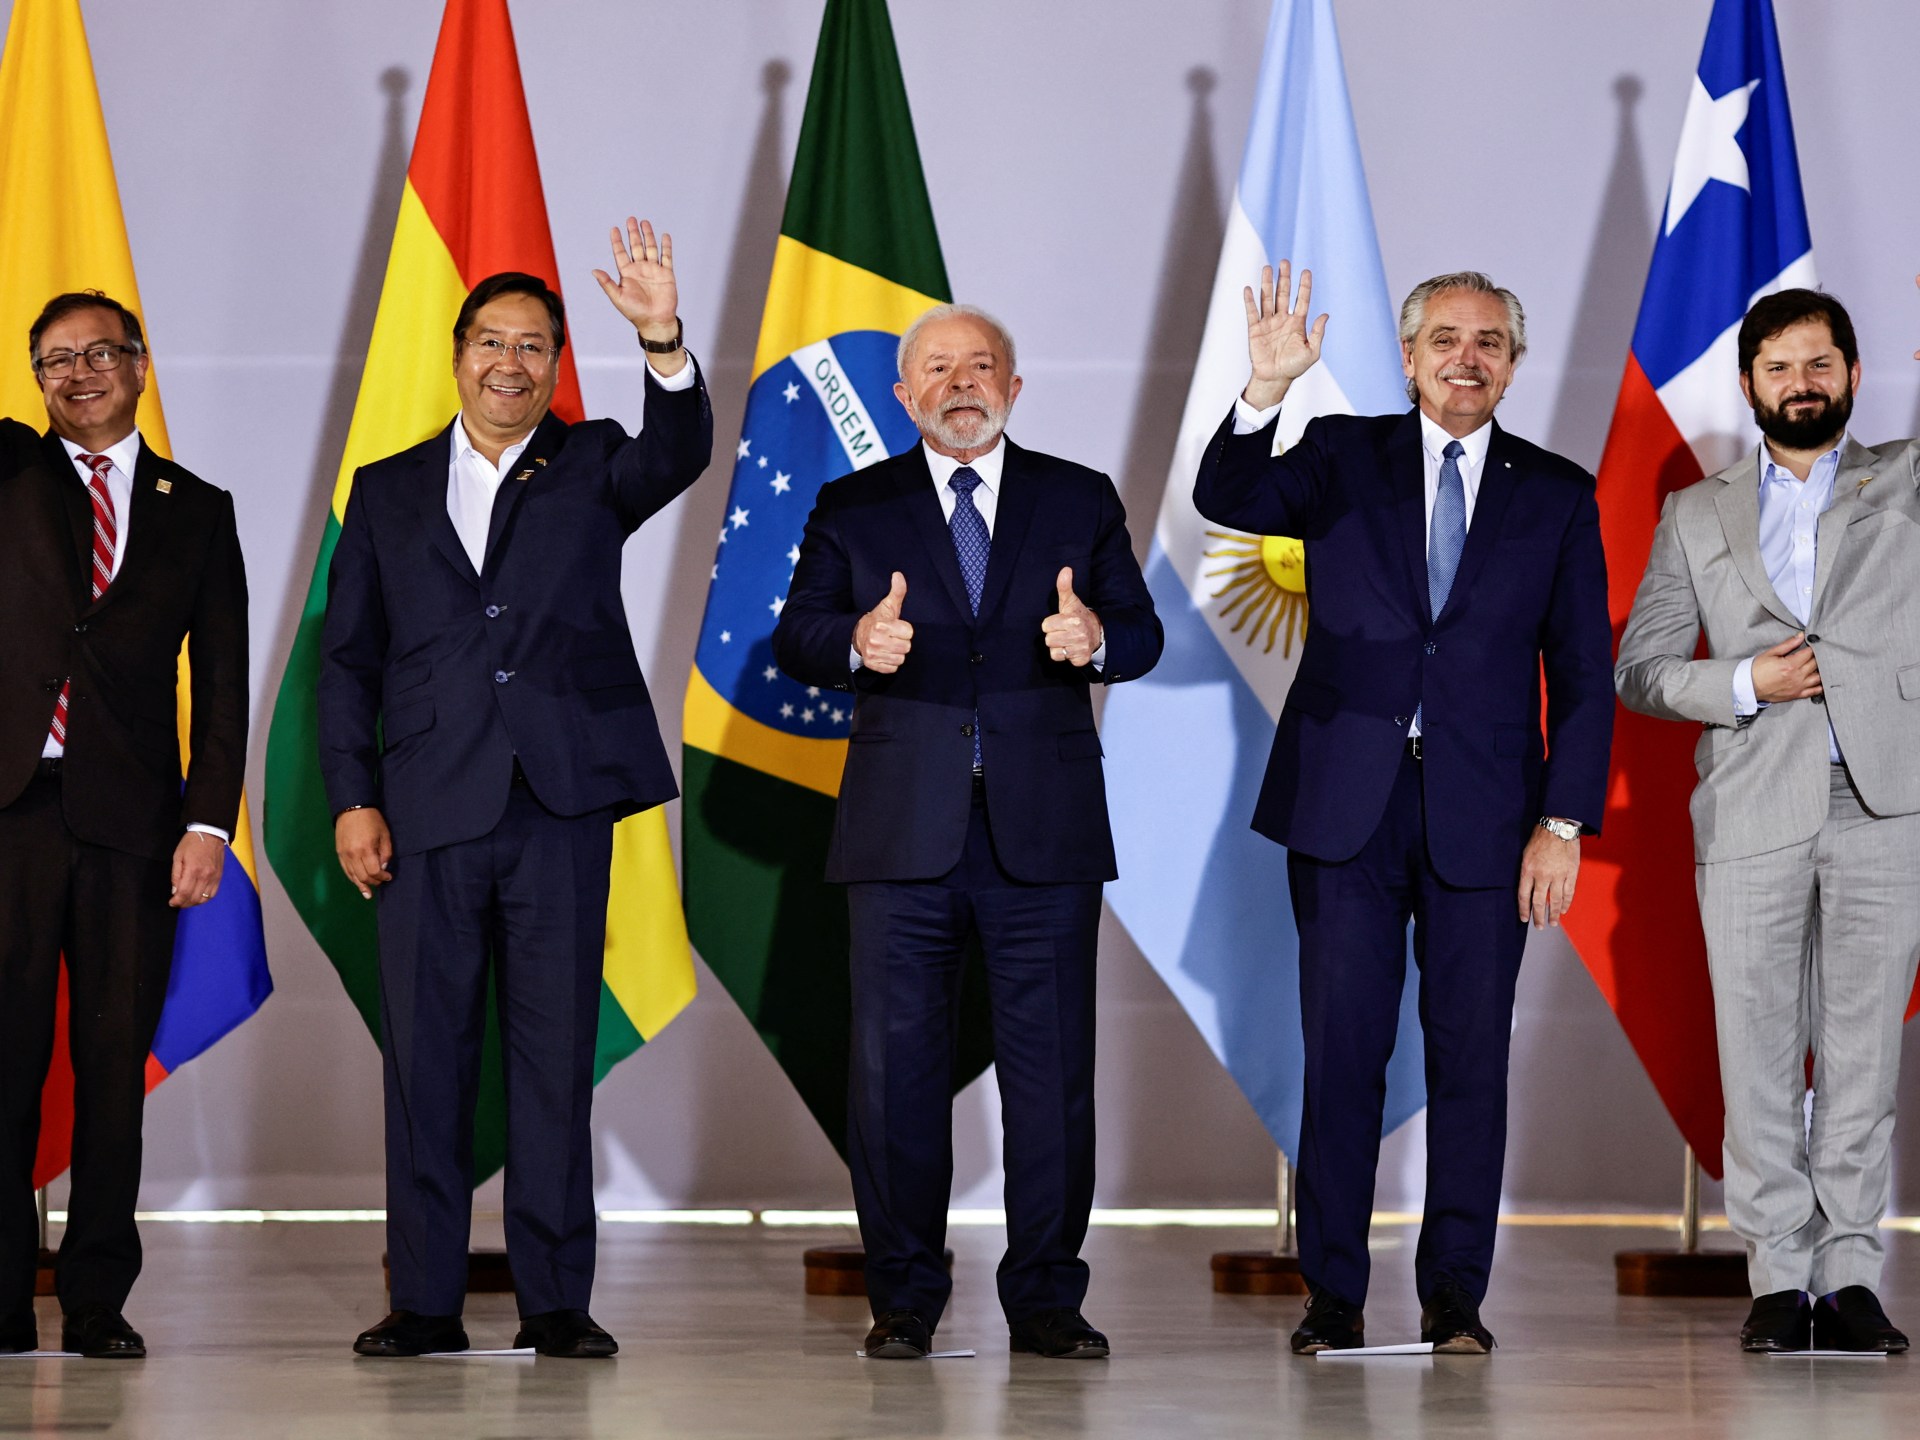 South America: A hard road to unity